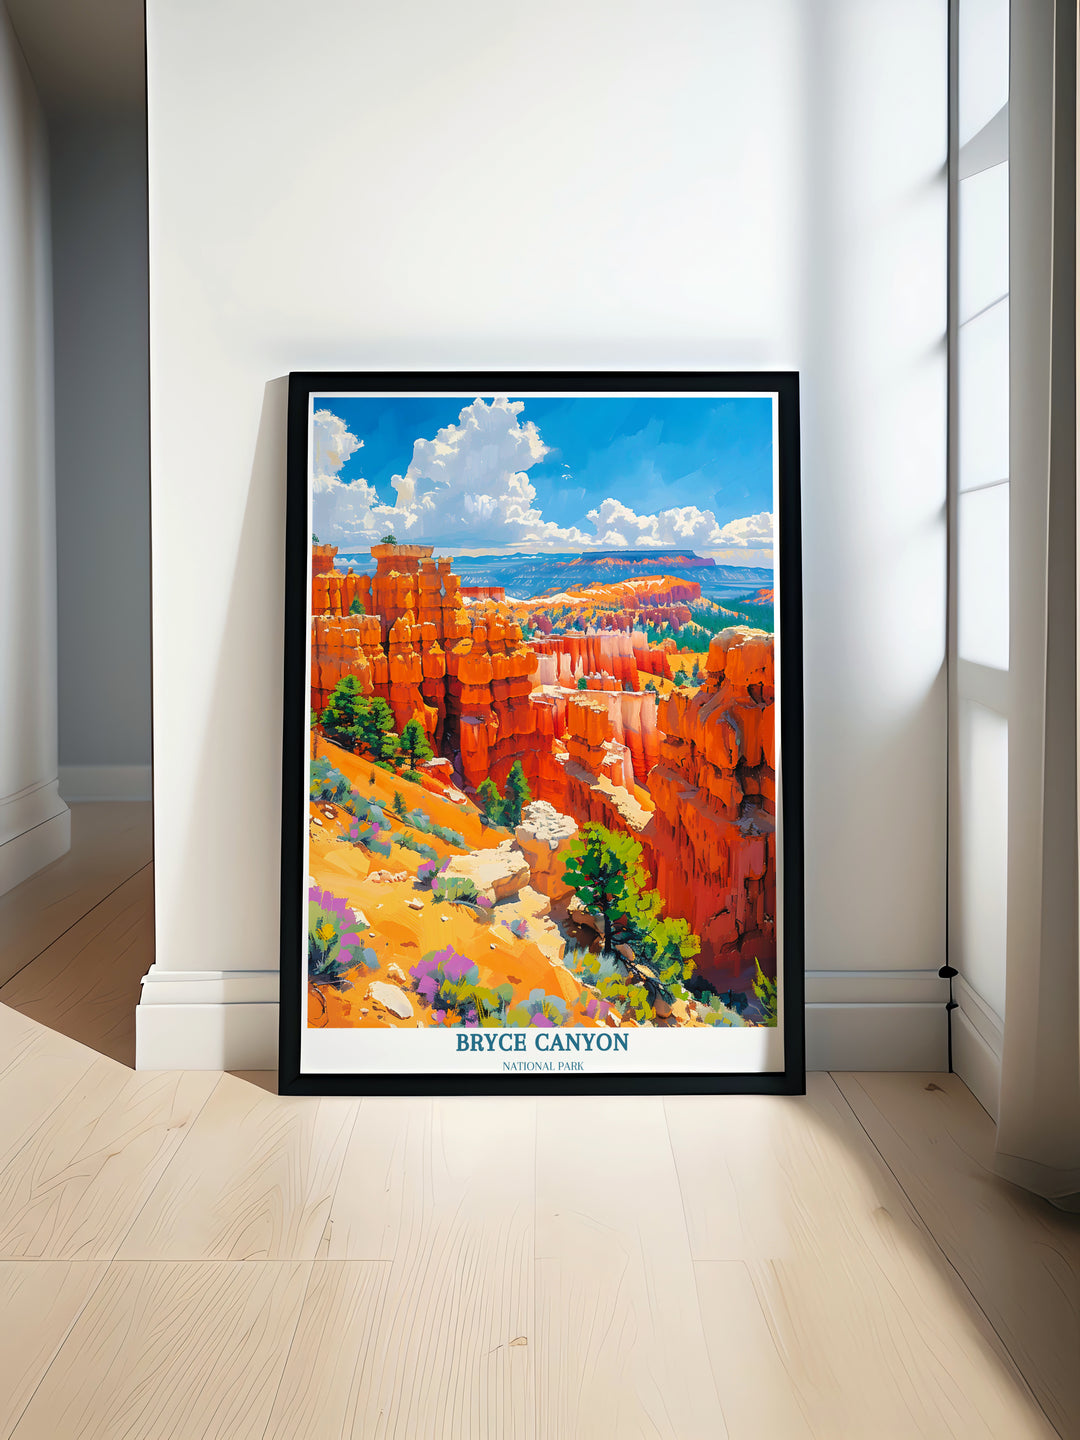 Bryce Canyon Decor Infuse your home with the natural splendor of Utahs Bryce Canyon Serenity awaits